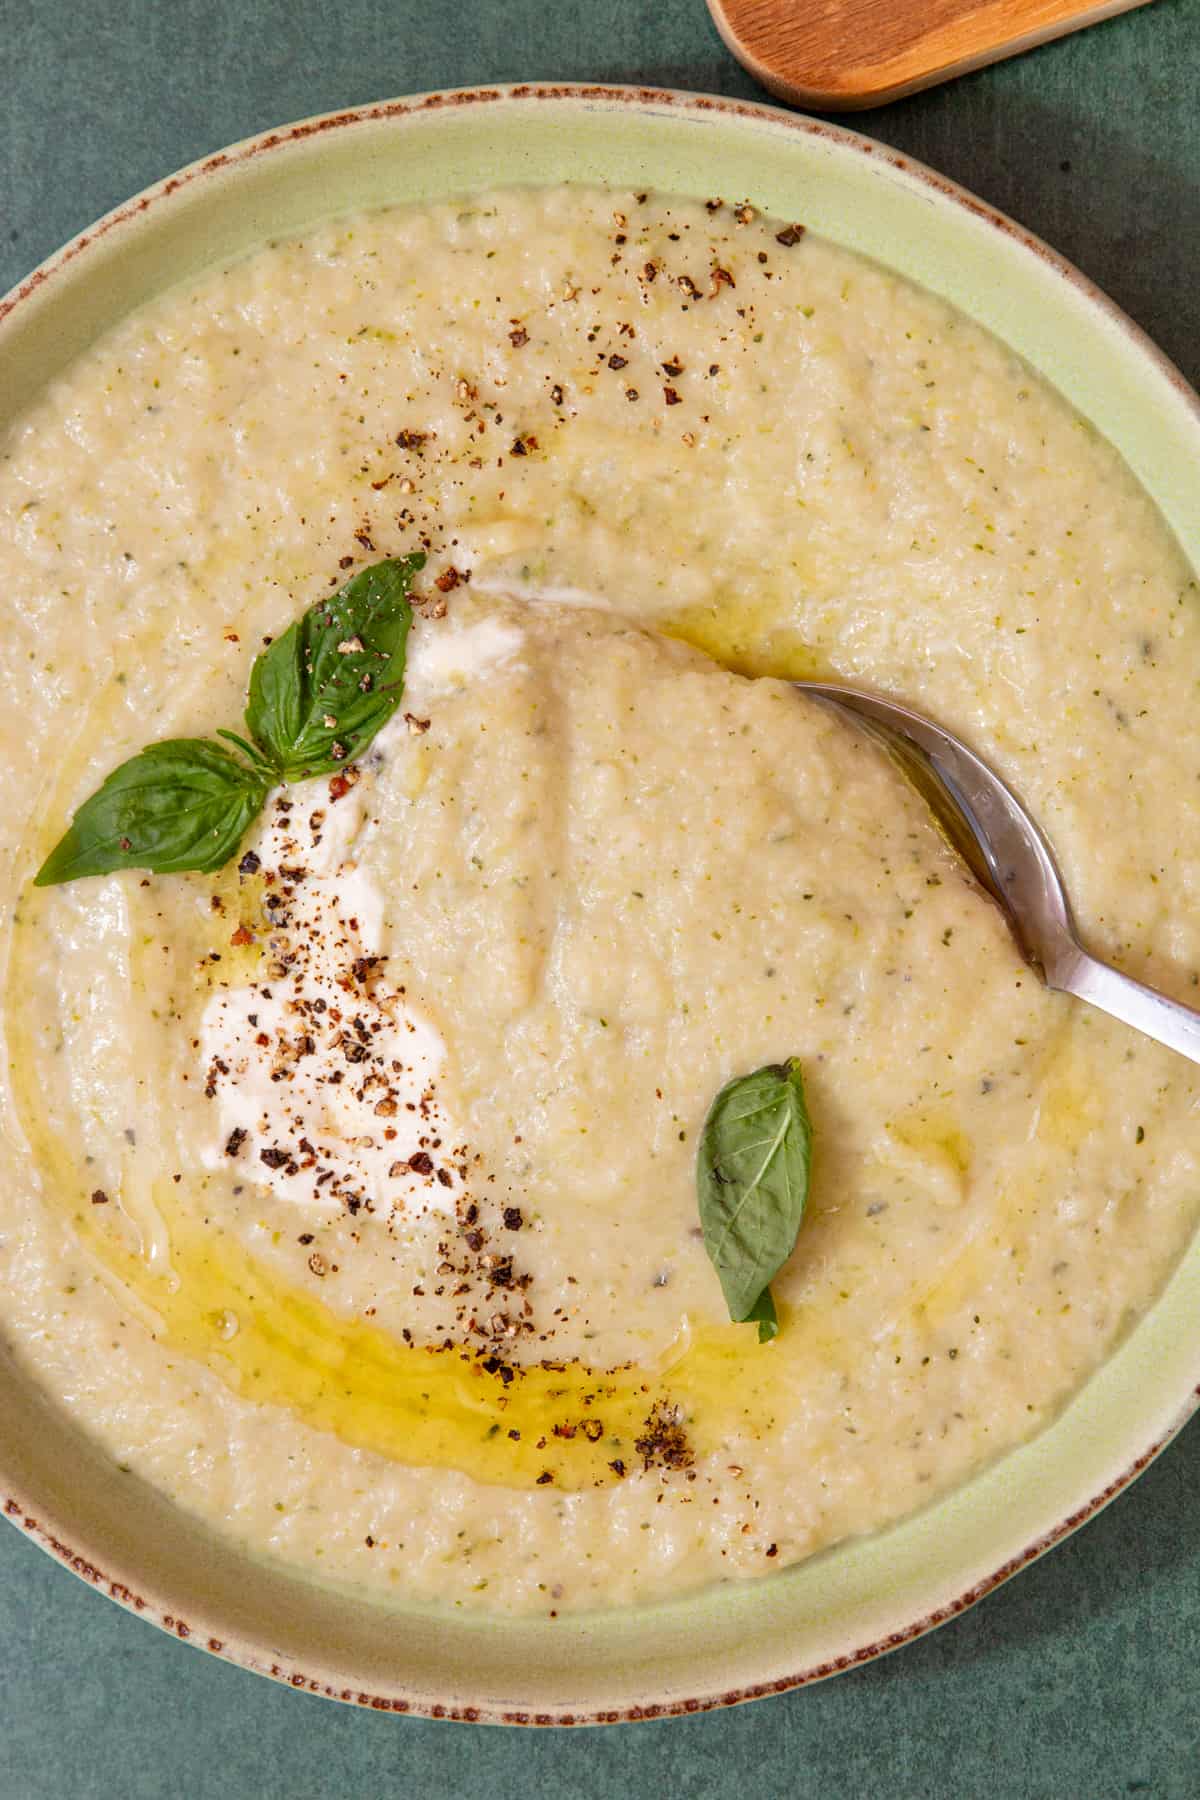 A bowl with a thick, creamy soup and a swirl of oil and cream topped with fresh basil and chilli flakes.